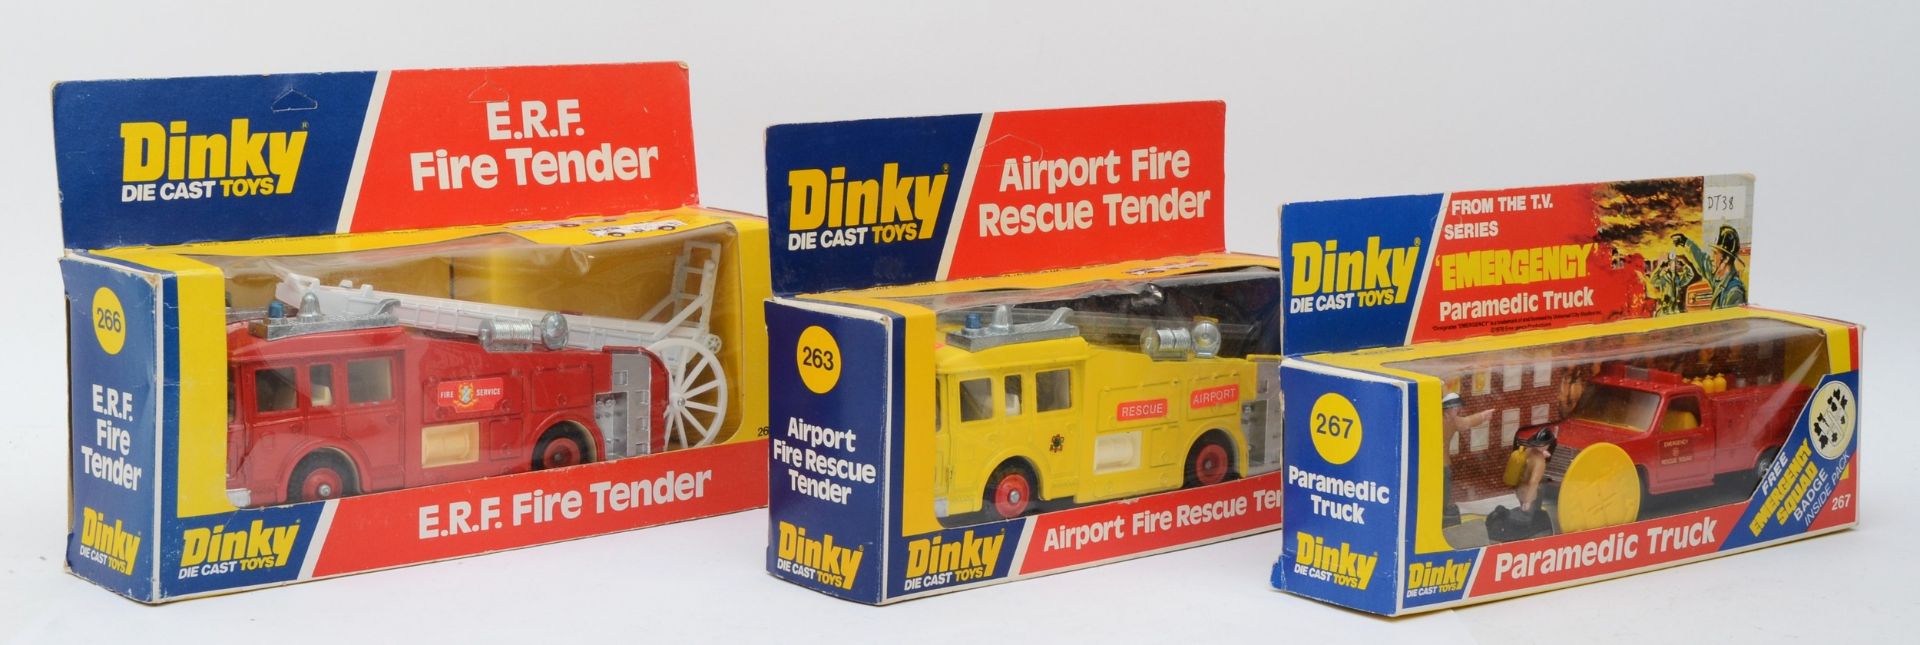 Dinky Toys - Comprising of a Dinky 267 Paramedic Truck 'Emergency' from the T.V series, together